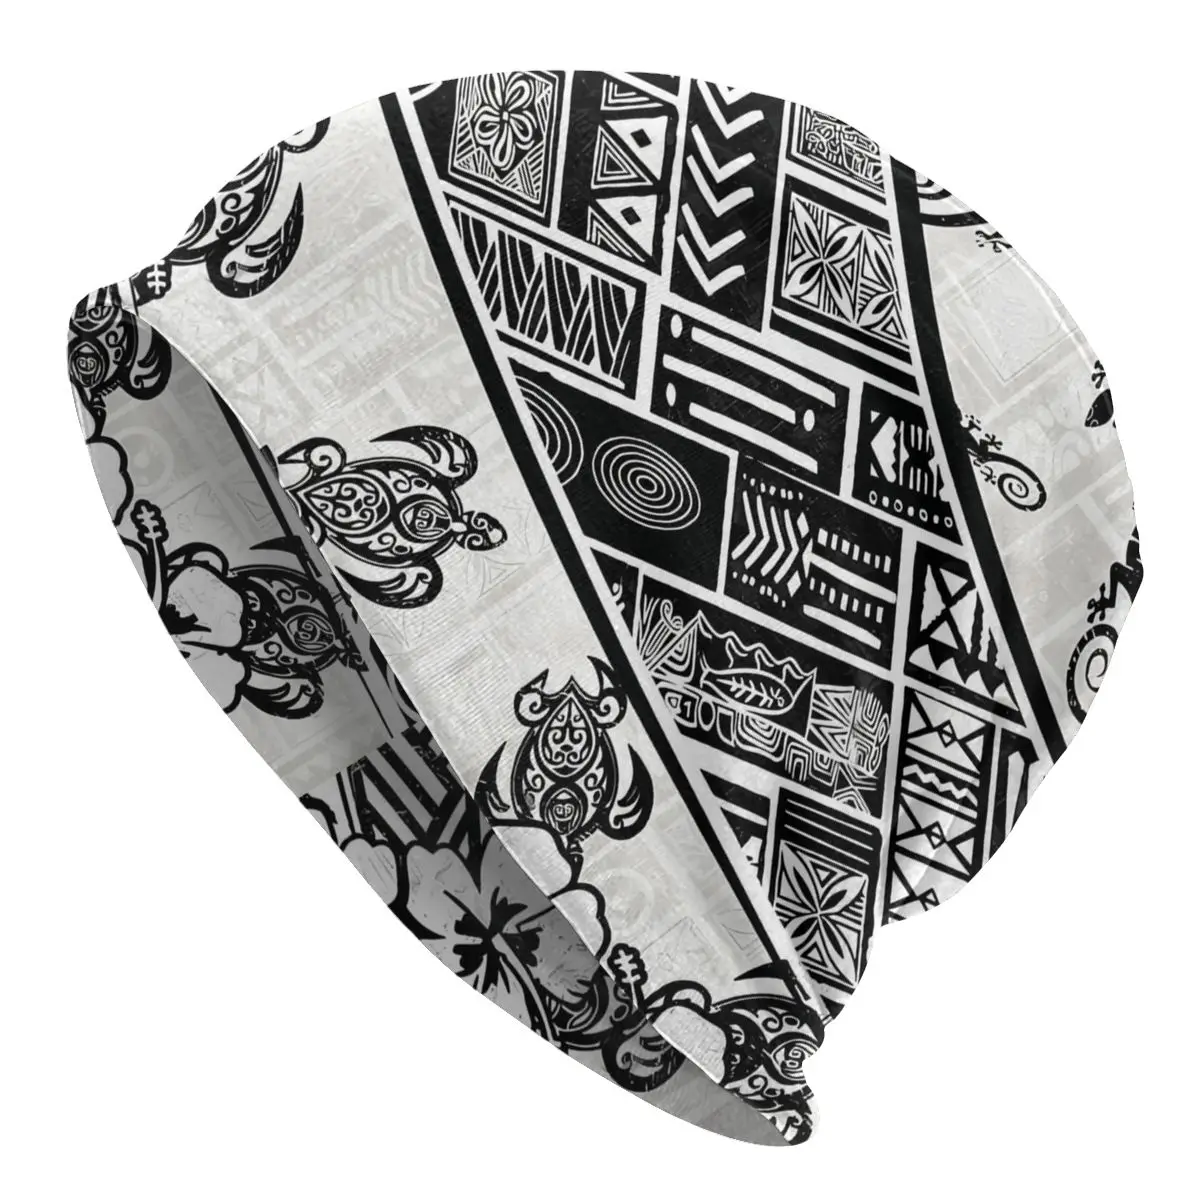 

Black And White Polynesian Tribal Distressed Thin Bonnet Homme Outdoor Samoan Skullies Beanies Caps Creative Hats